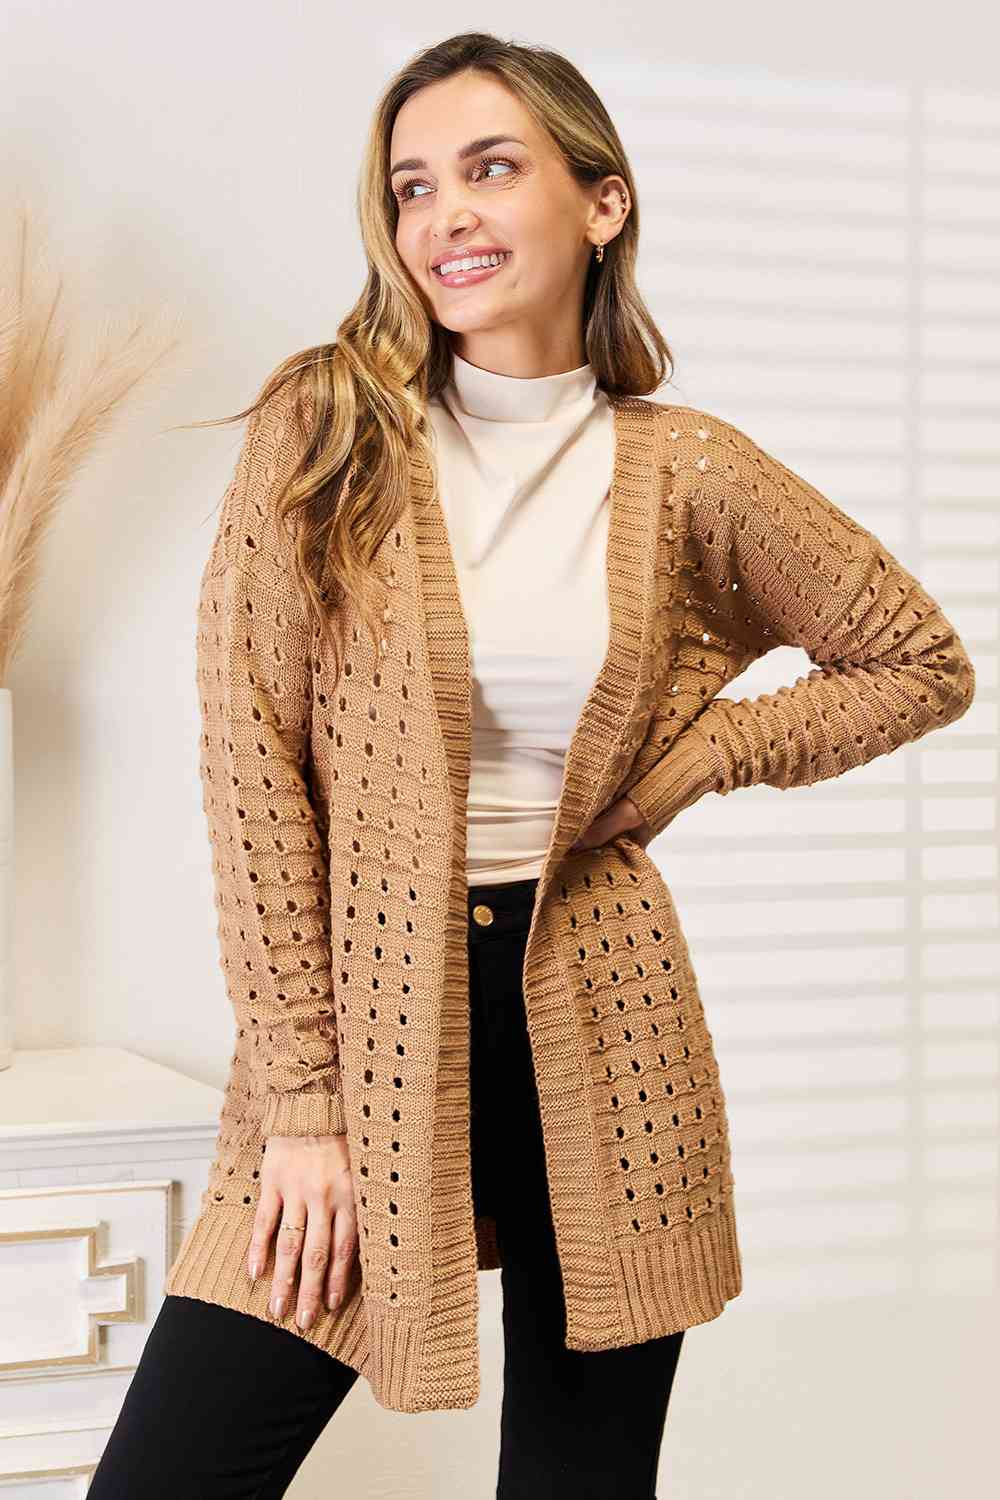 Woven Right Openwork Horizontal Ribbing Open Front Cardigan - Crazy Like a Daisy Boutique #